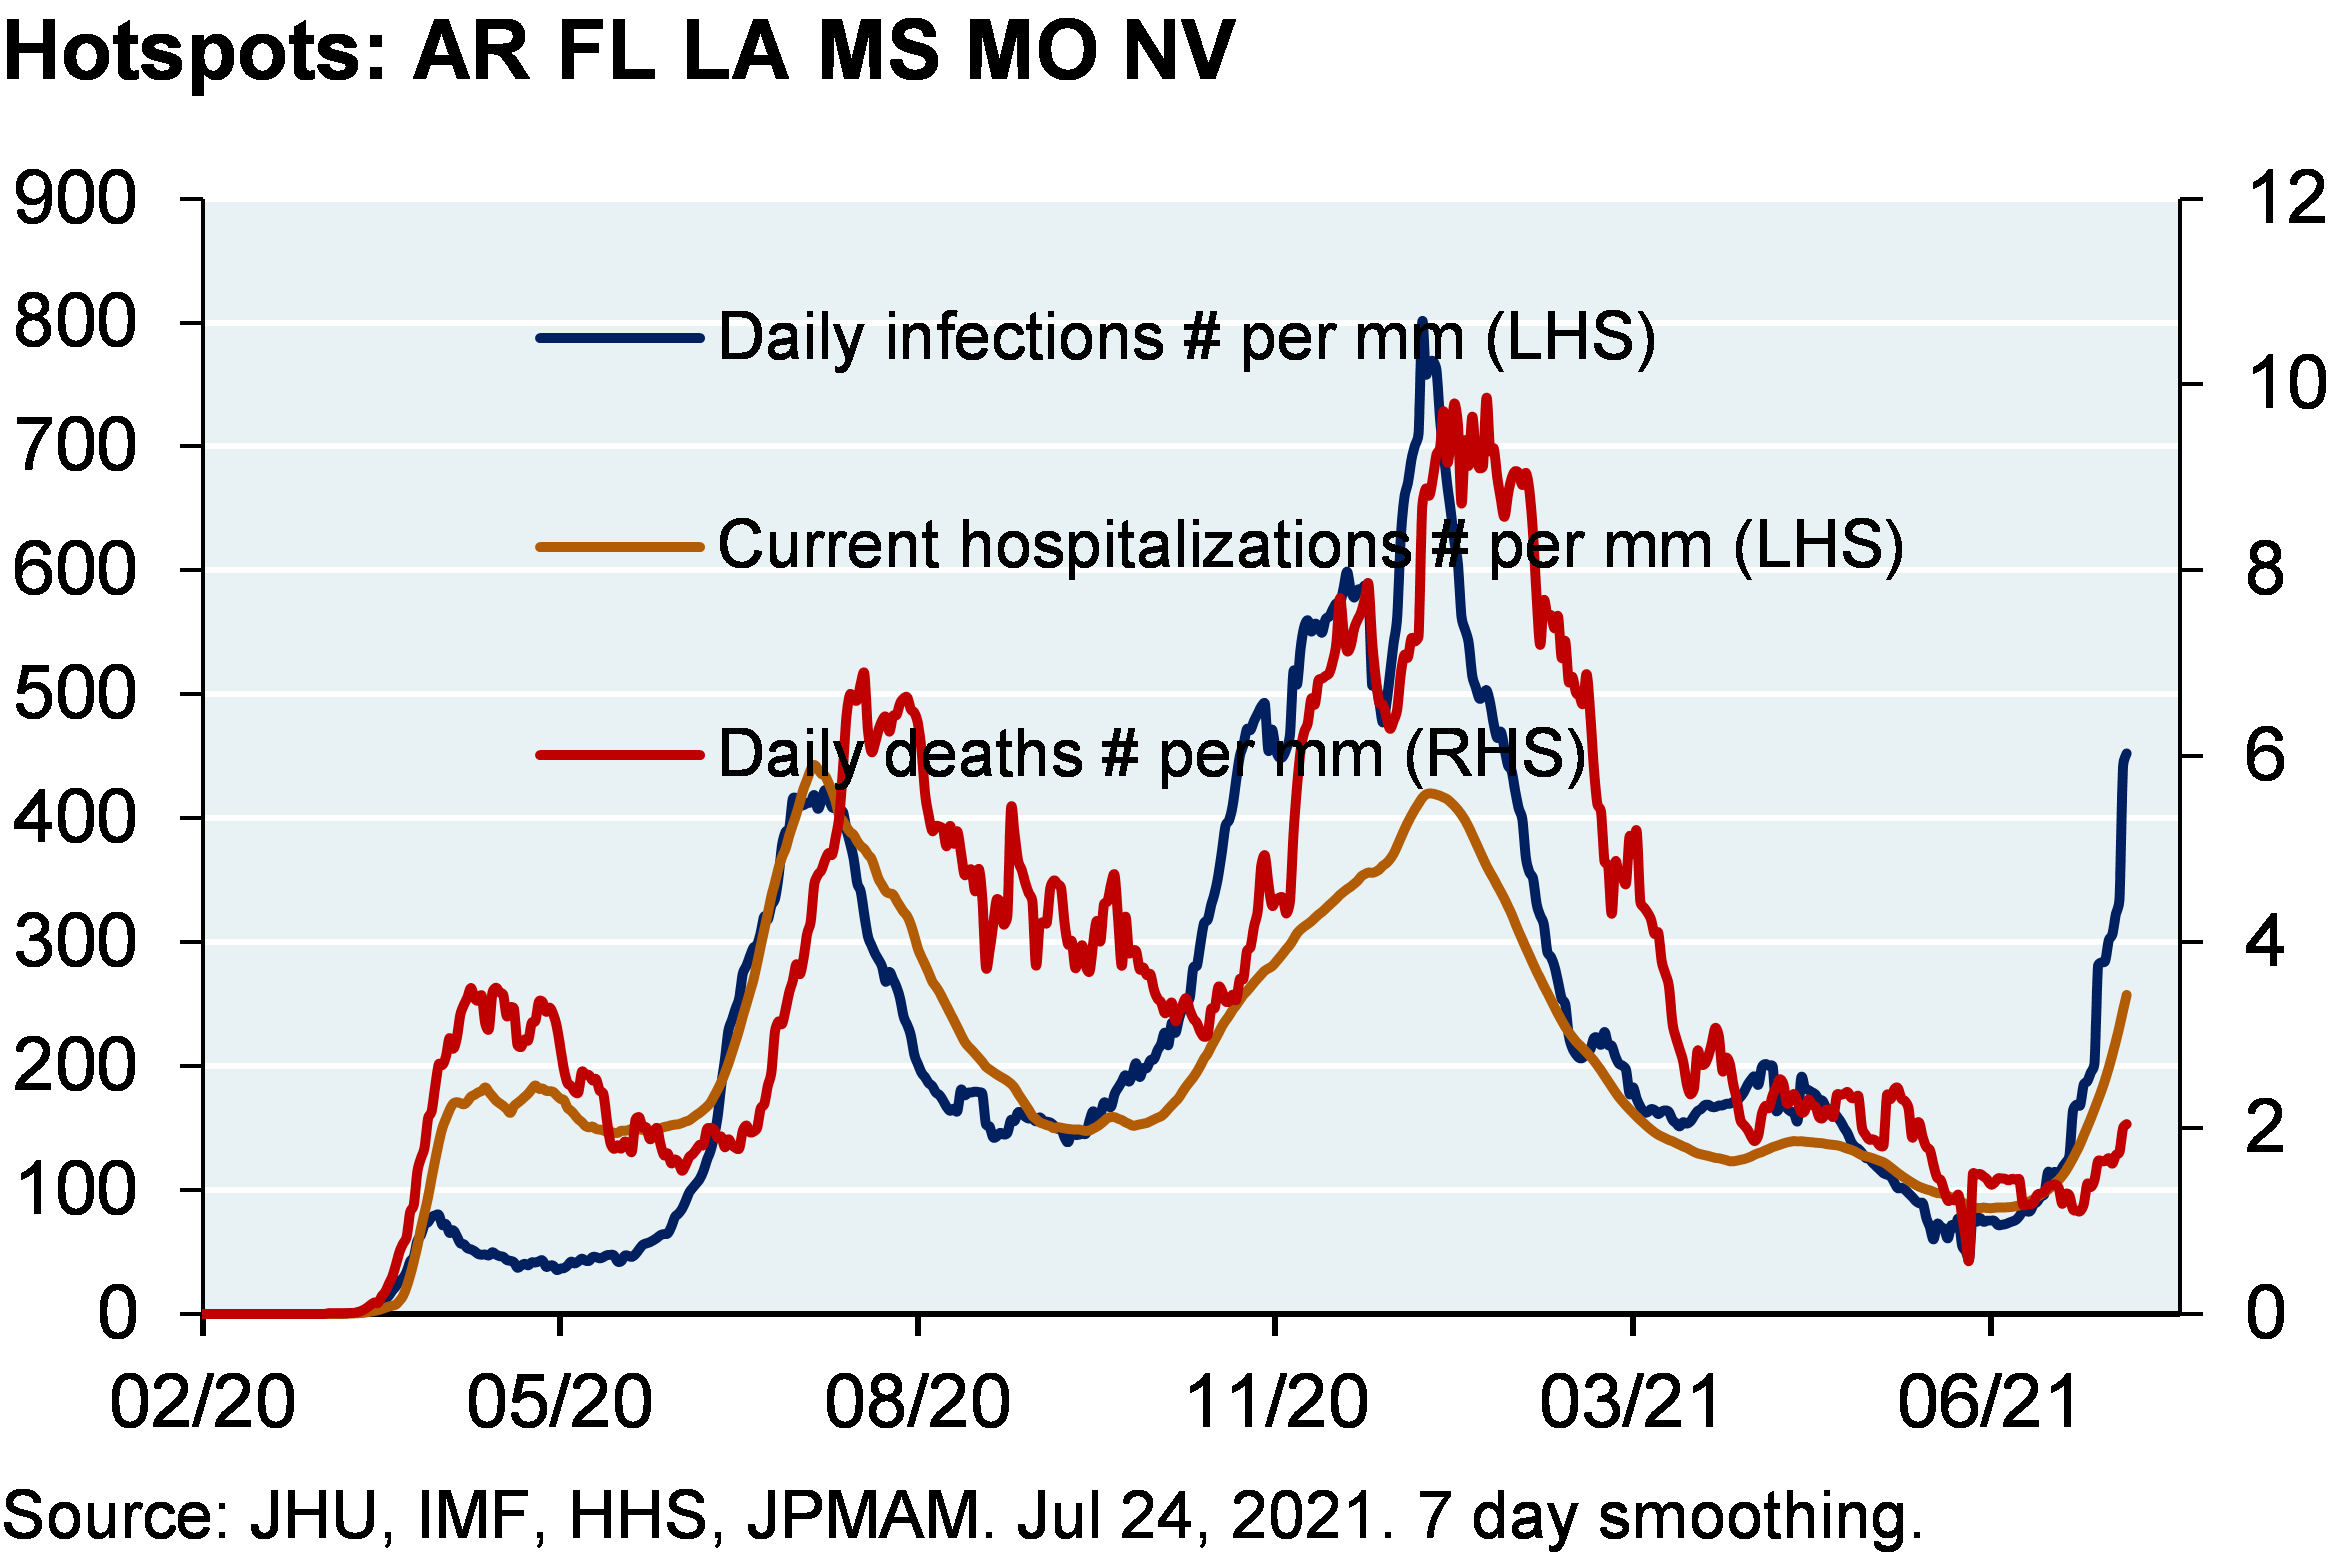 Line chart shows daily infections per million, current hospitalizations per million and daily deaths per million among the hotspot states (Arkansas, Florida, Louisiana, Mississippi, Missouri and Nevada). Chart shows that daily infections per million have spiked in the hotspot states to around 450 infections per million. Hospitalizations have slightly increased to around 200 hospitalizations per million and deaths have also seen a slight increase to almost 2 deaths per million. 